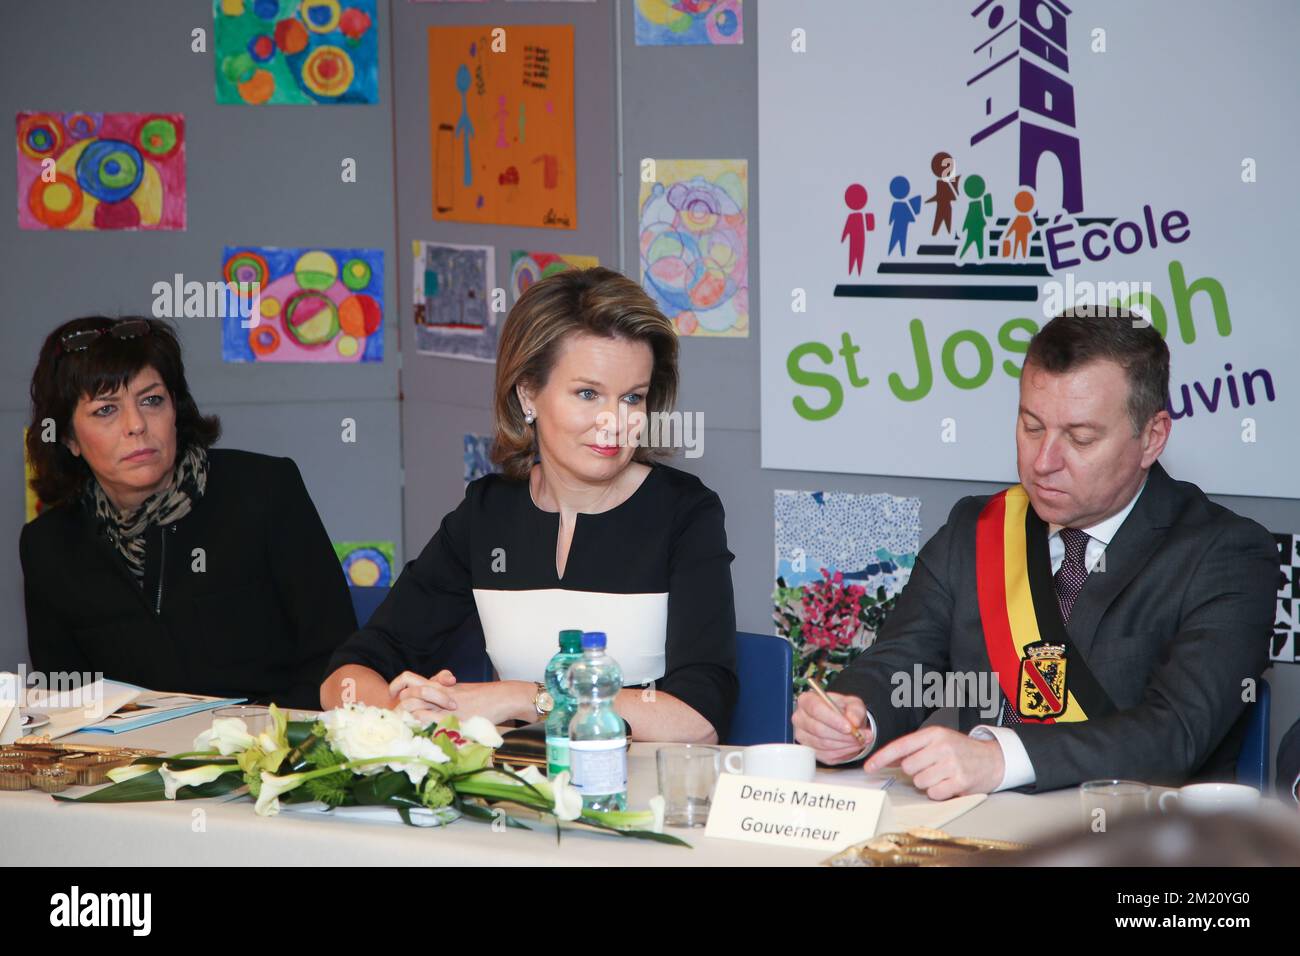 Minister Joelle Milquet, Queen Mathilde of Belgium and Namur province governor Denis Mathen pictured during a royal visit to the Saint-Joseph school in Couvin, Wednesday 03 February 2016. This visit of the Queen follows a round table on harassment in June 2015. BELGA PHOTO BRUNO FAHY Stock Photo